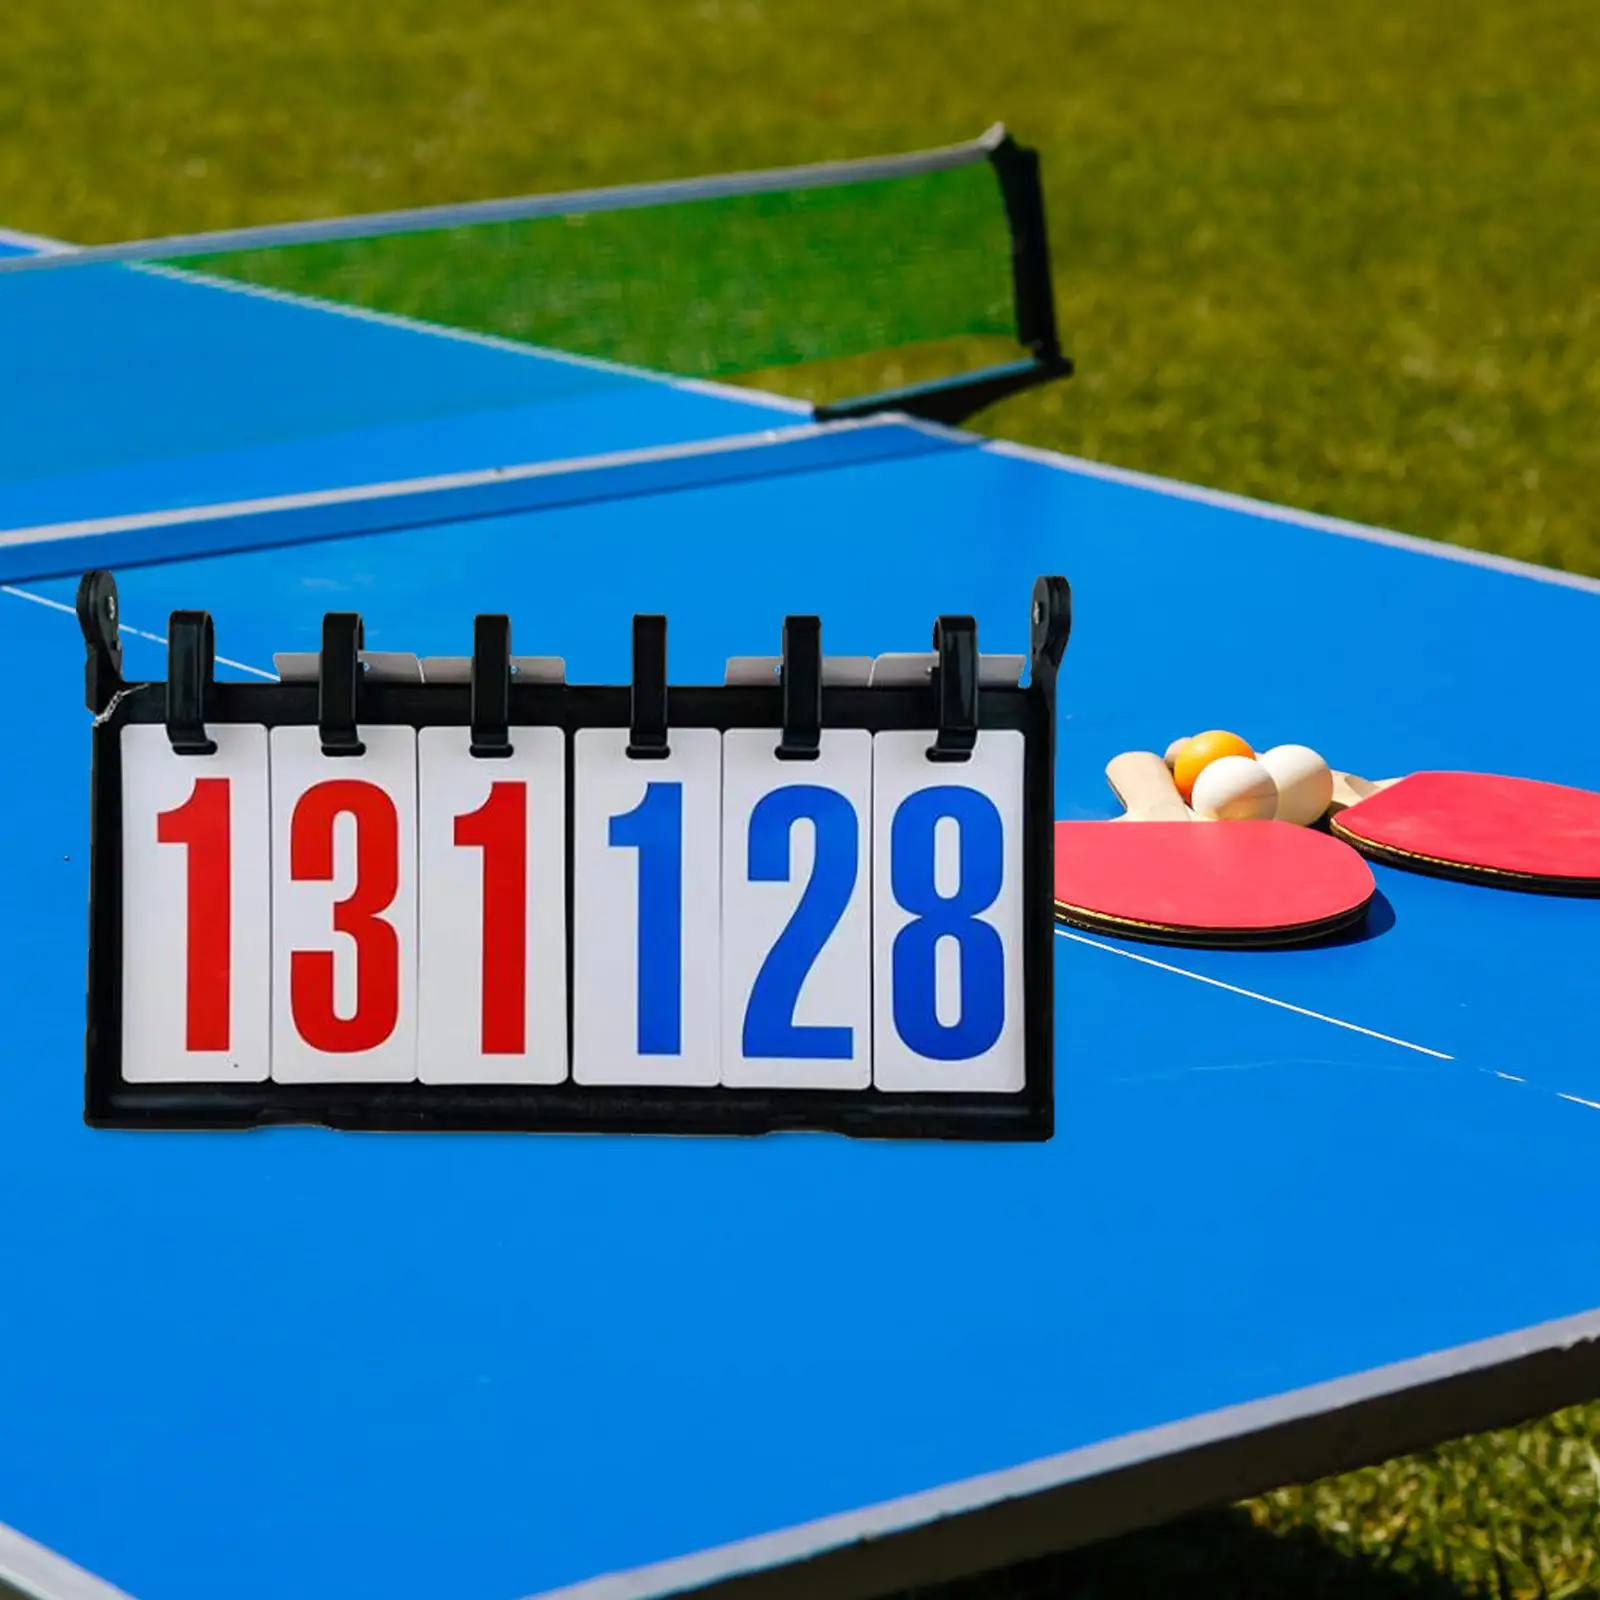 Table Scoreboard Portable 6 Digit Soccer Referee Competition Score Keeper for Table Tennis Indoor Badminton Basketball Outdoor